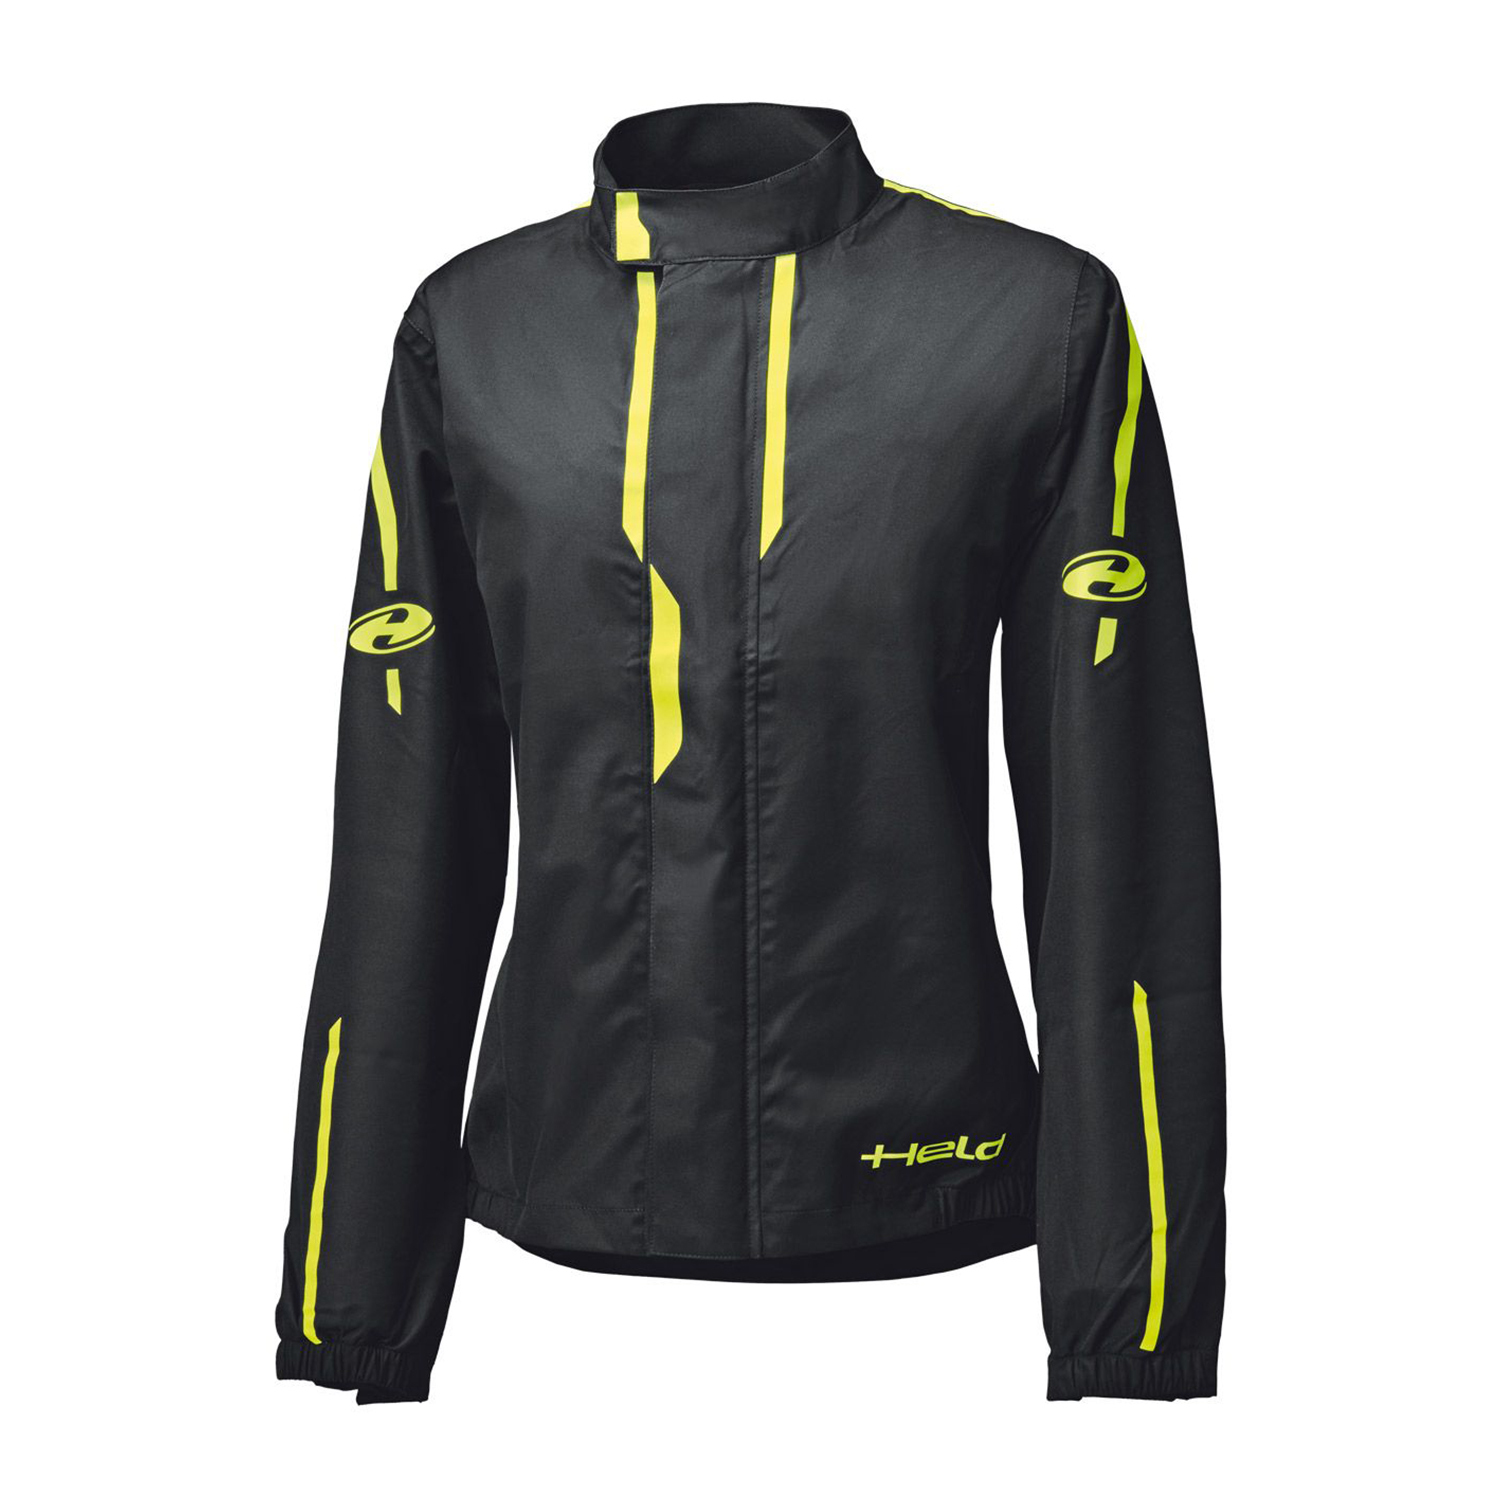 Held Rainstorm Top Womens Black-Fluorescent Yellow - Available in Various Sizes